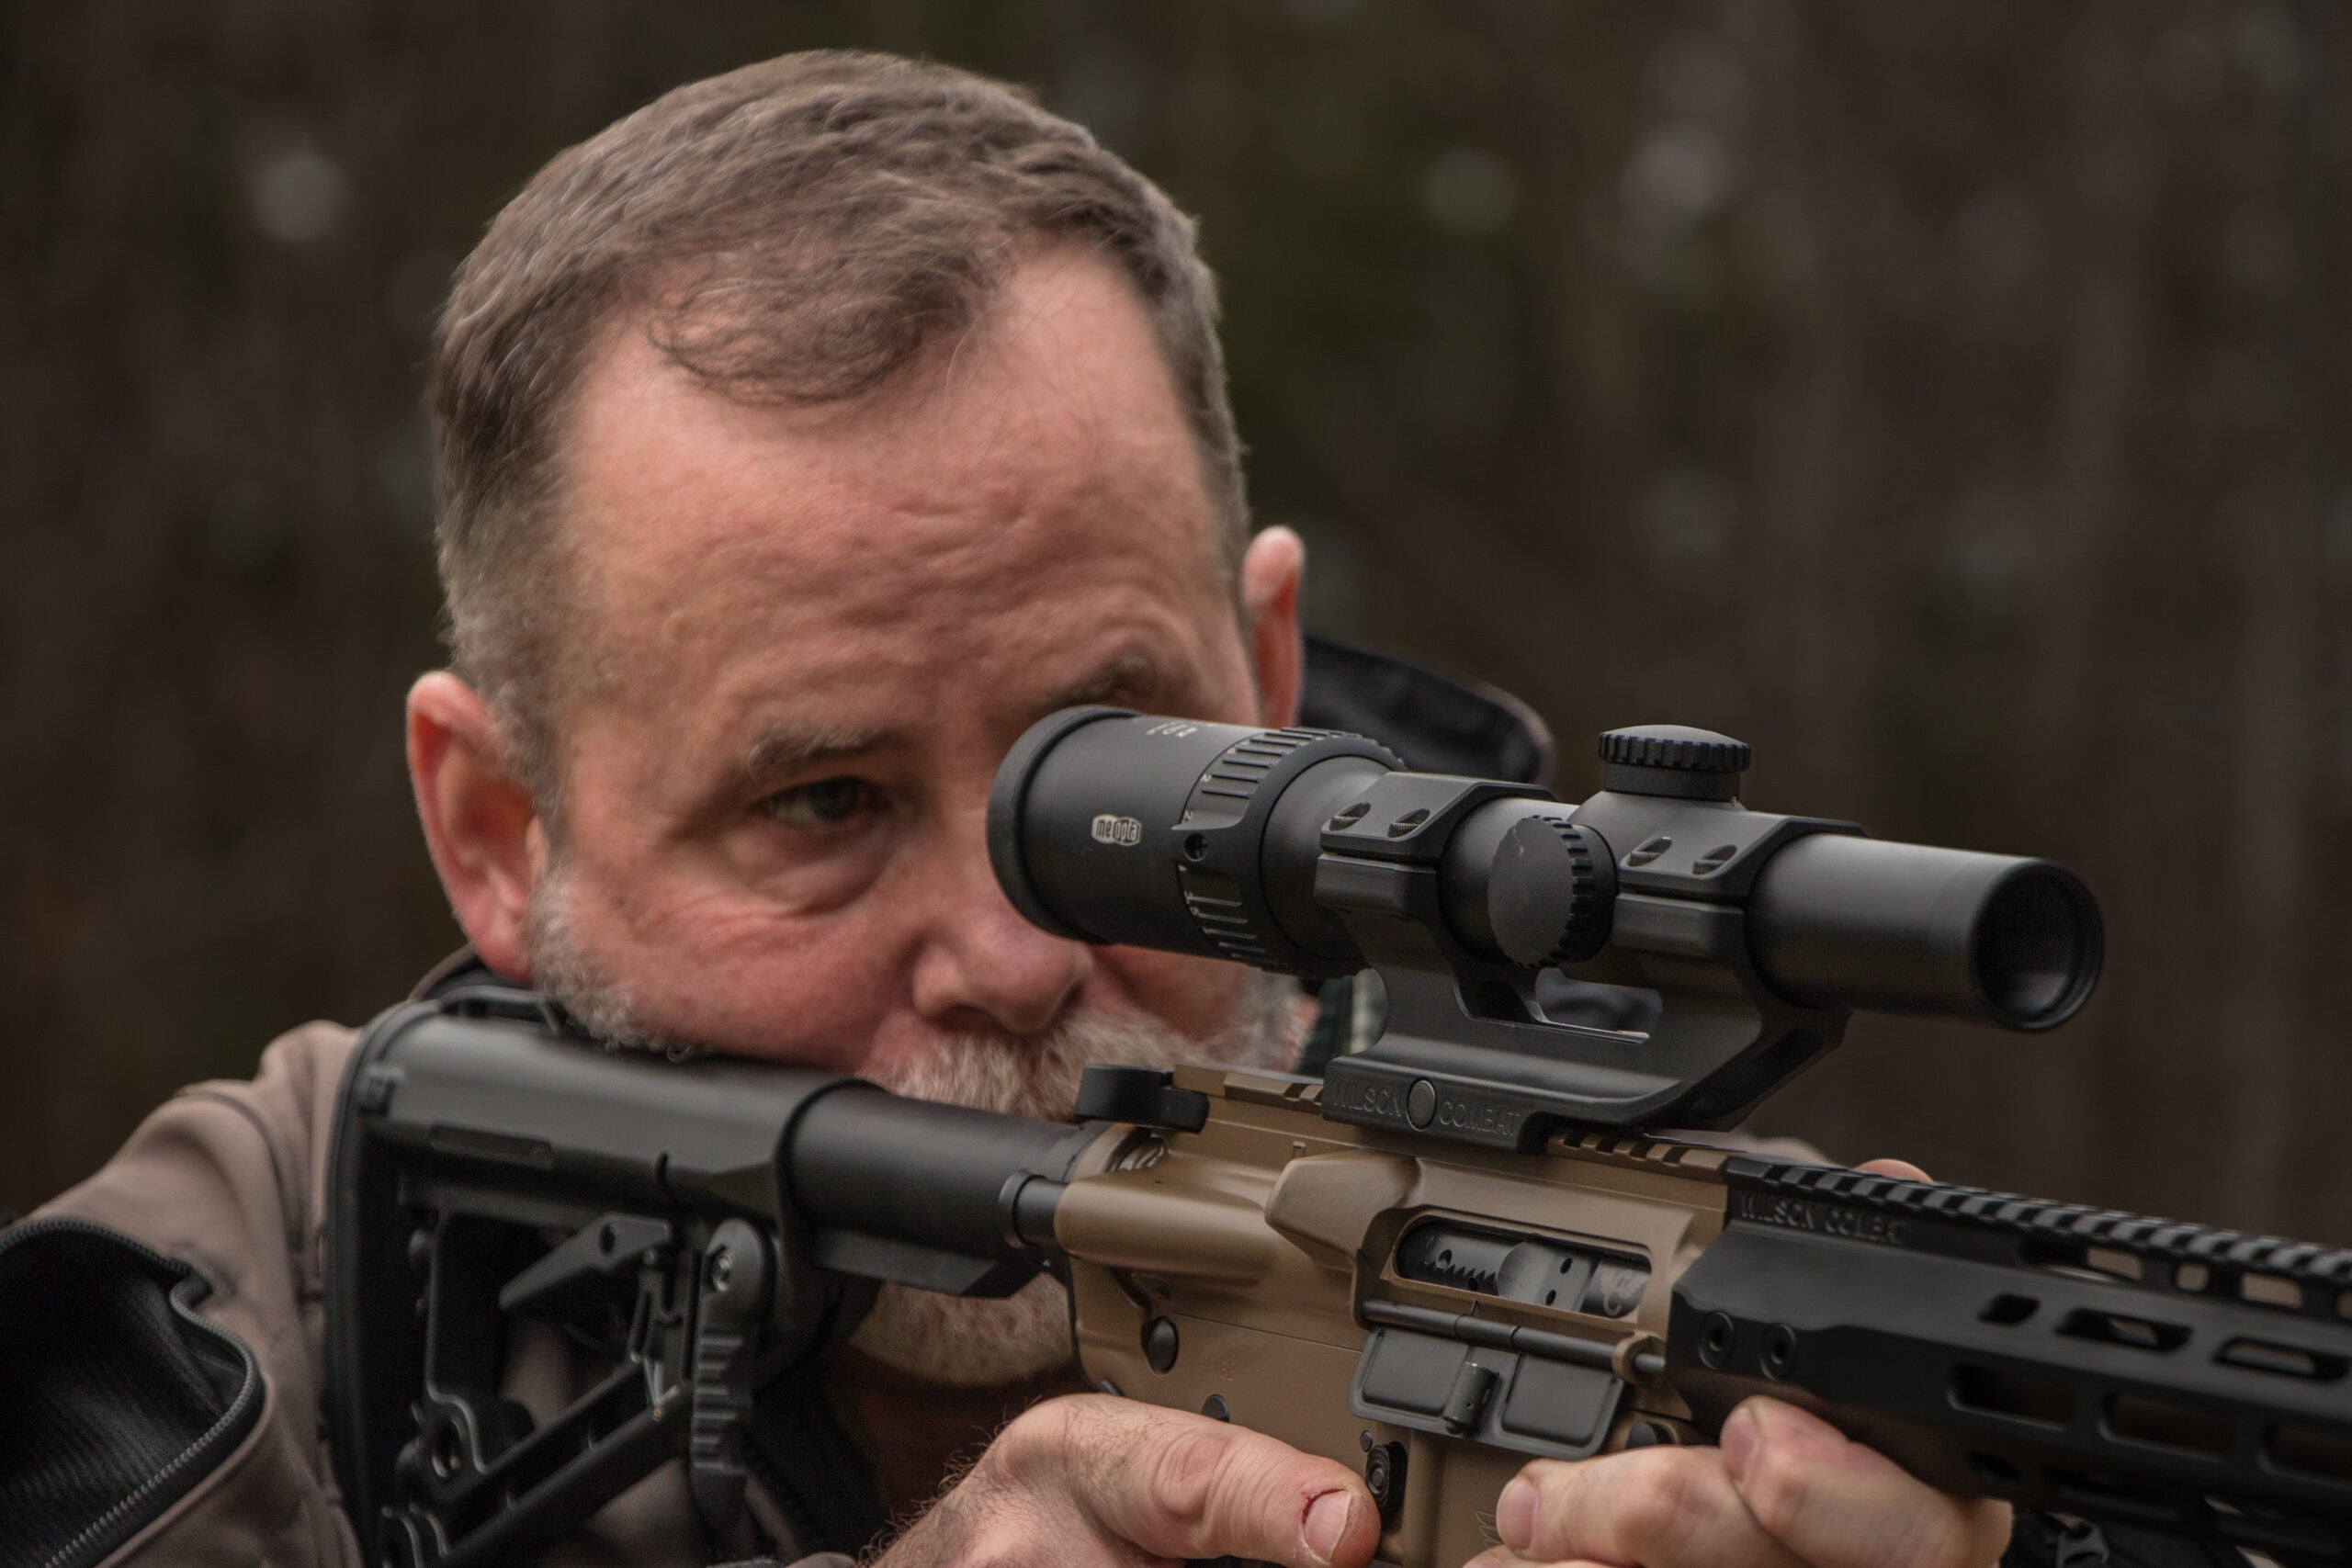 A shooter aims through the scope of an AR-15 rifle chambered for 556 NATO